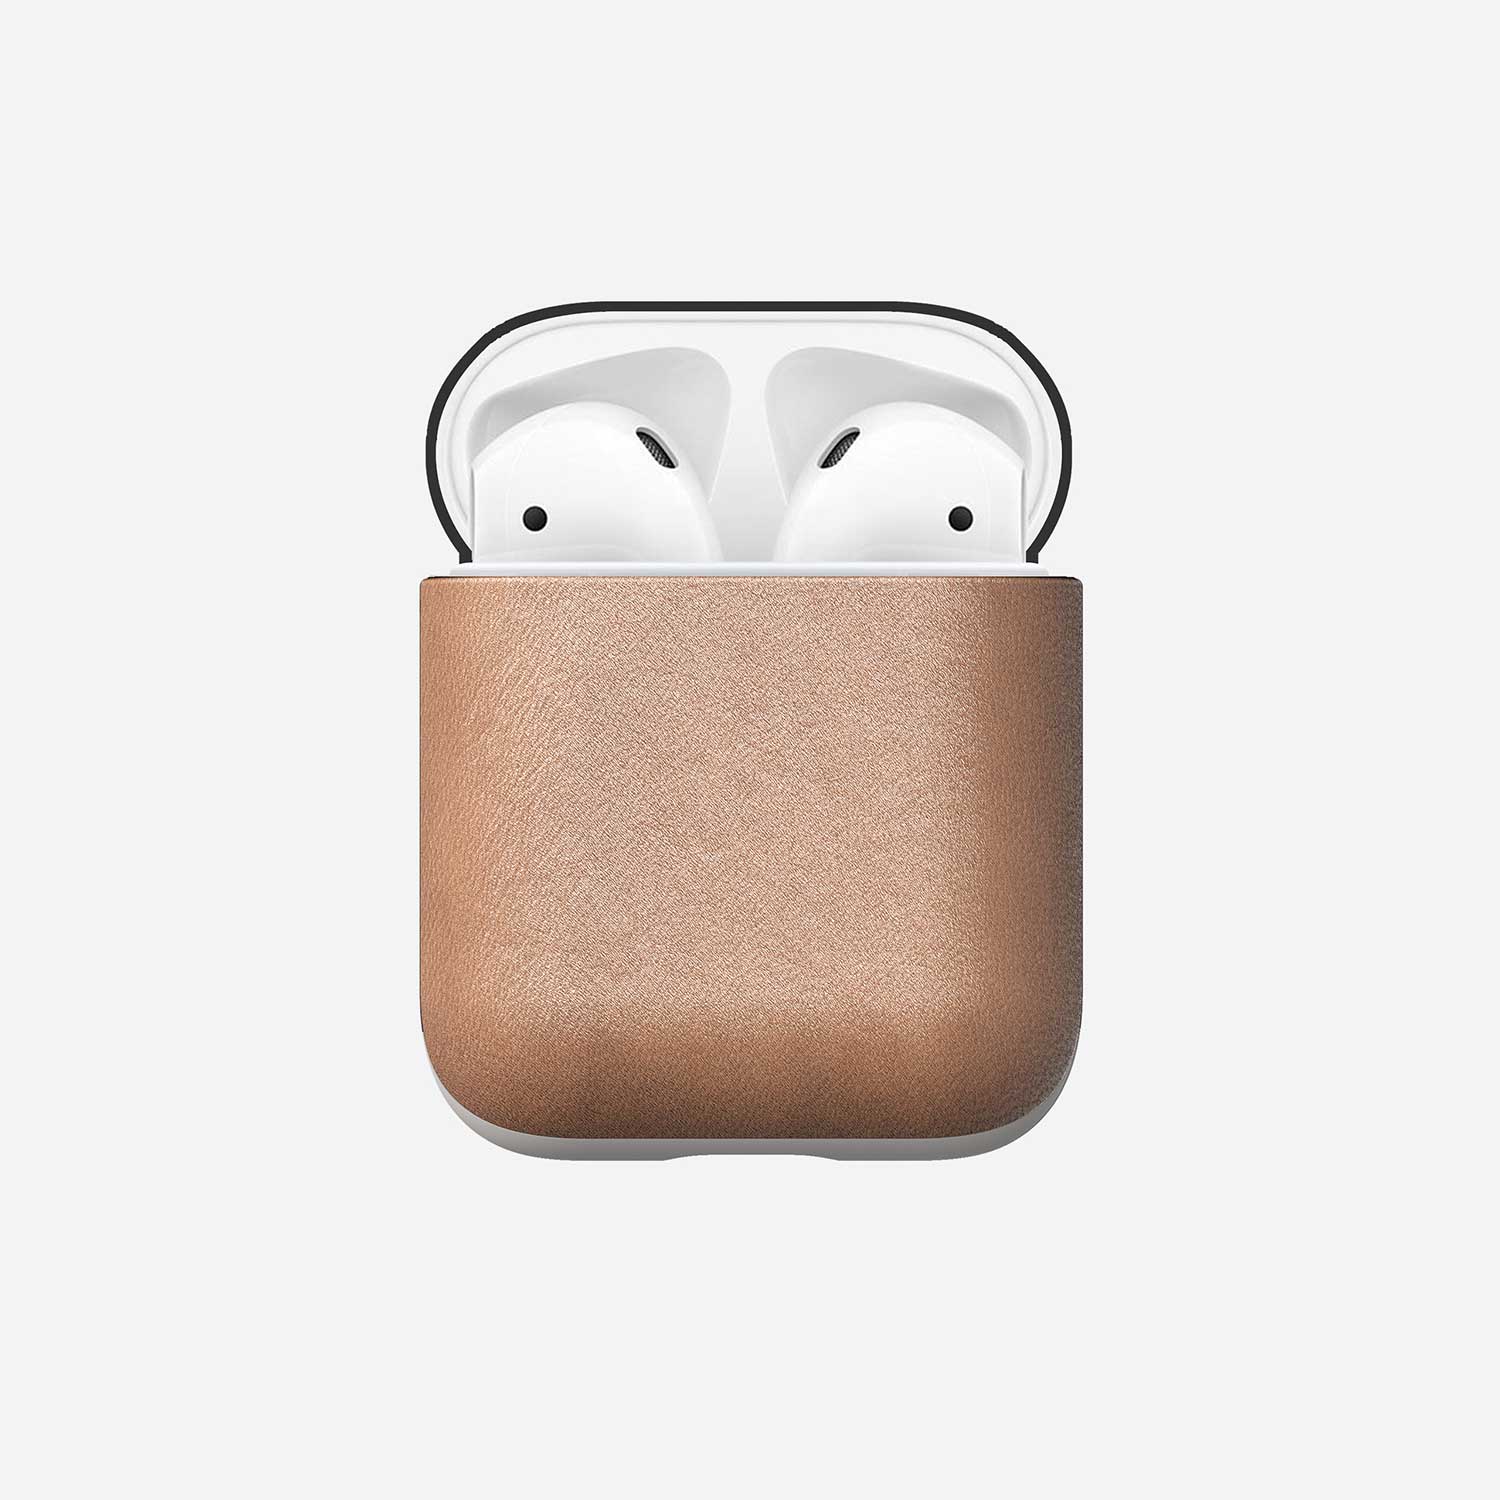 Rugged-Nomad-AirPods-Case-Natrual